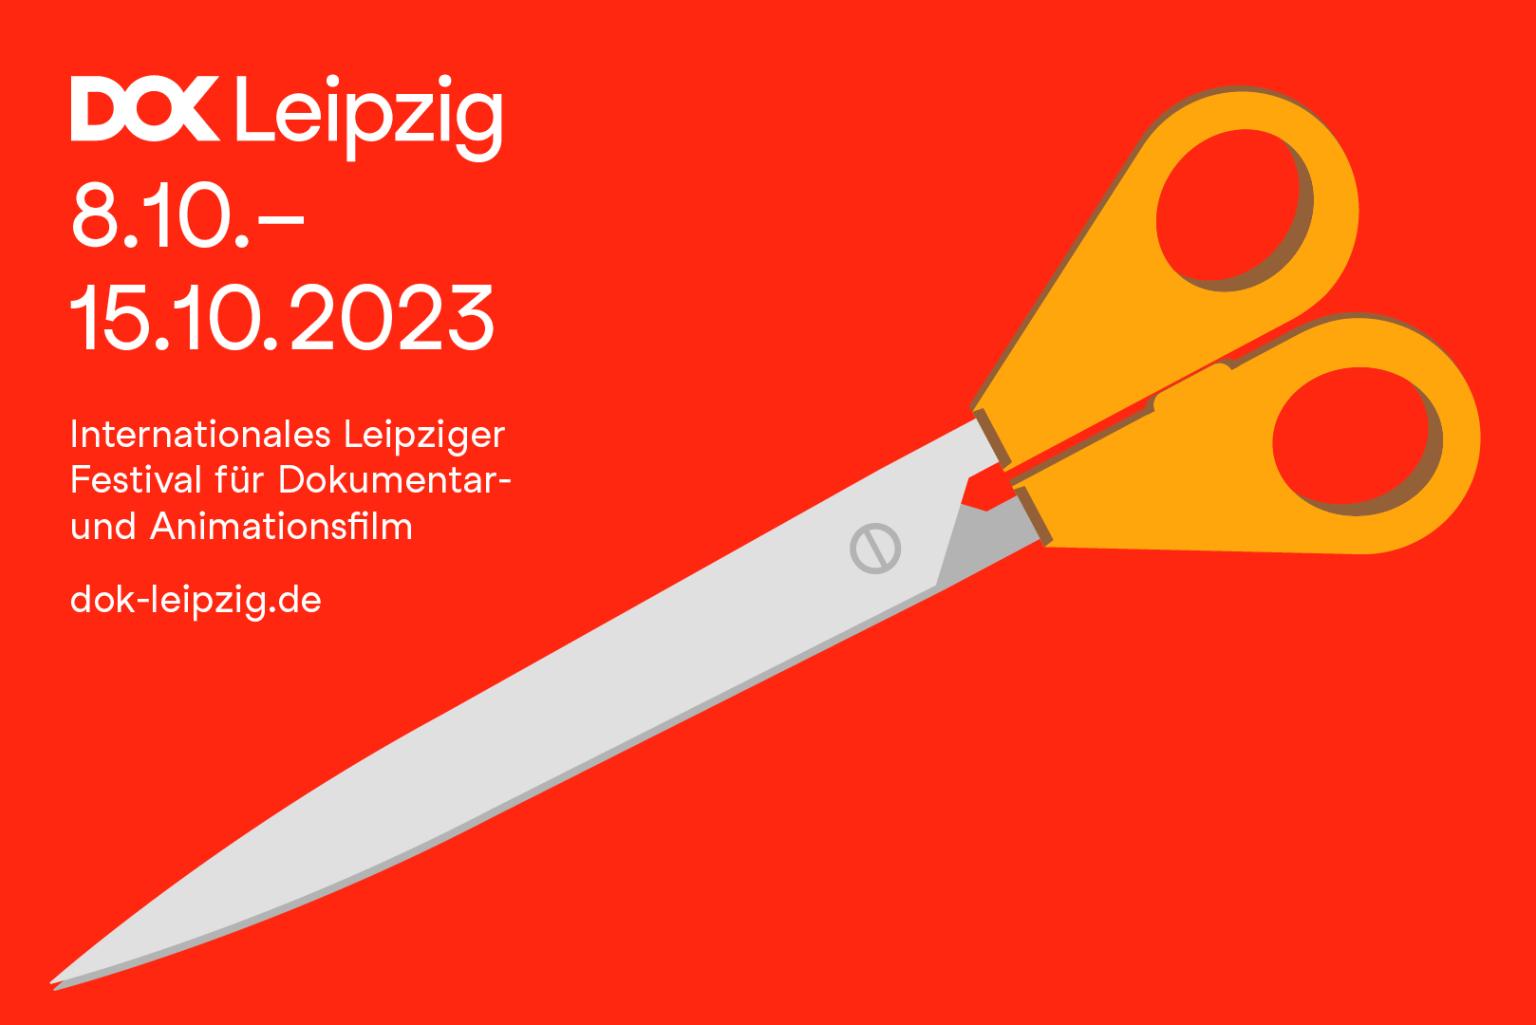 The poster design for 2023 is a pair of scissors with gray blades and orange handles on a red background.